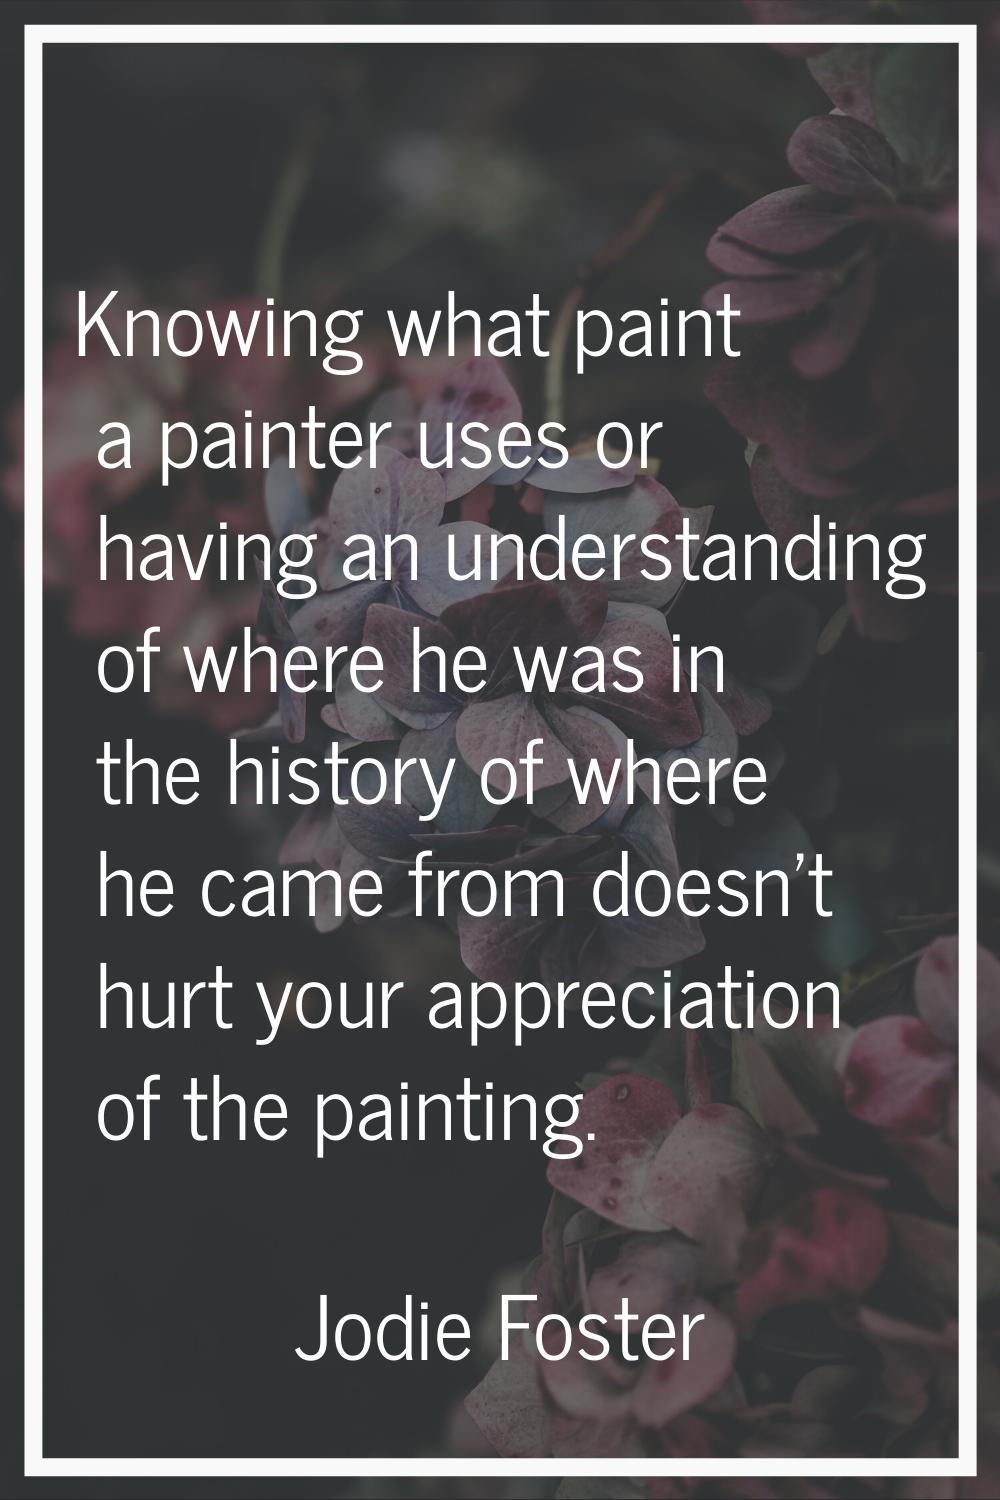 Knowing what paint a painter uses or having an understanding of where he was in the history of wher